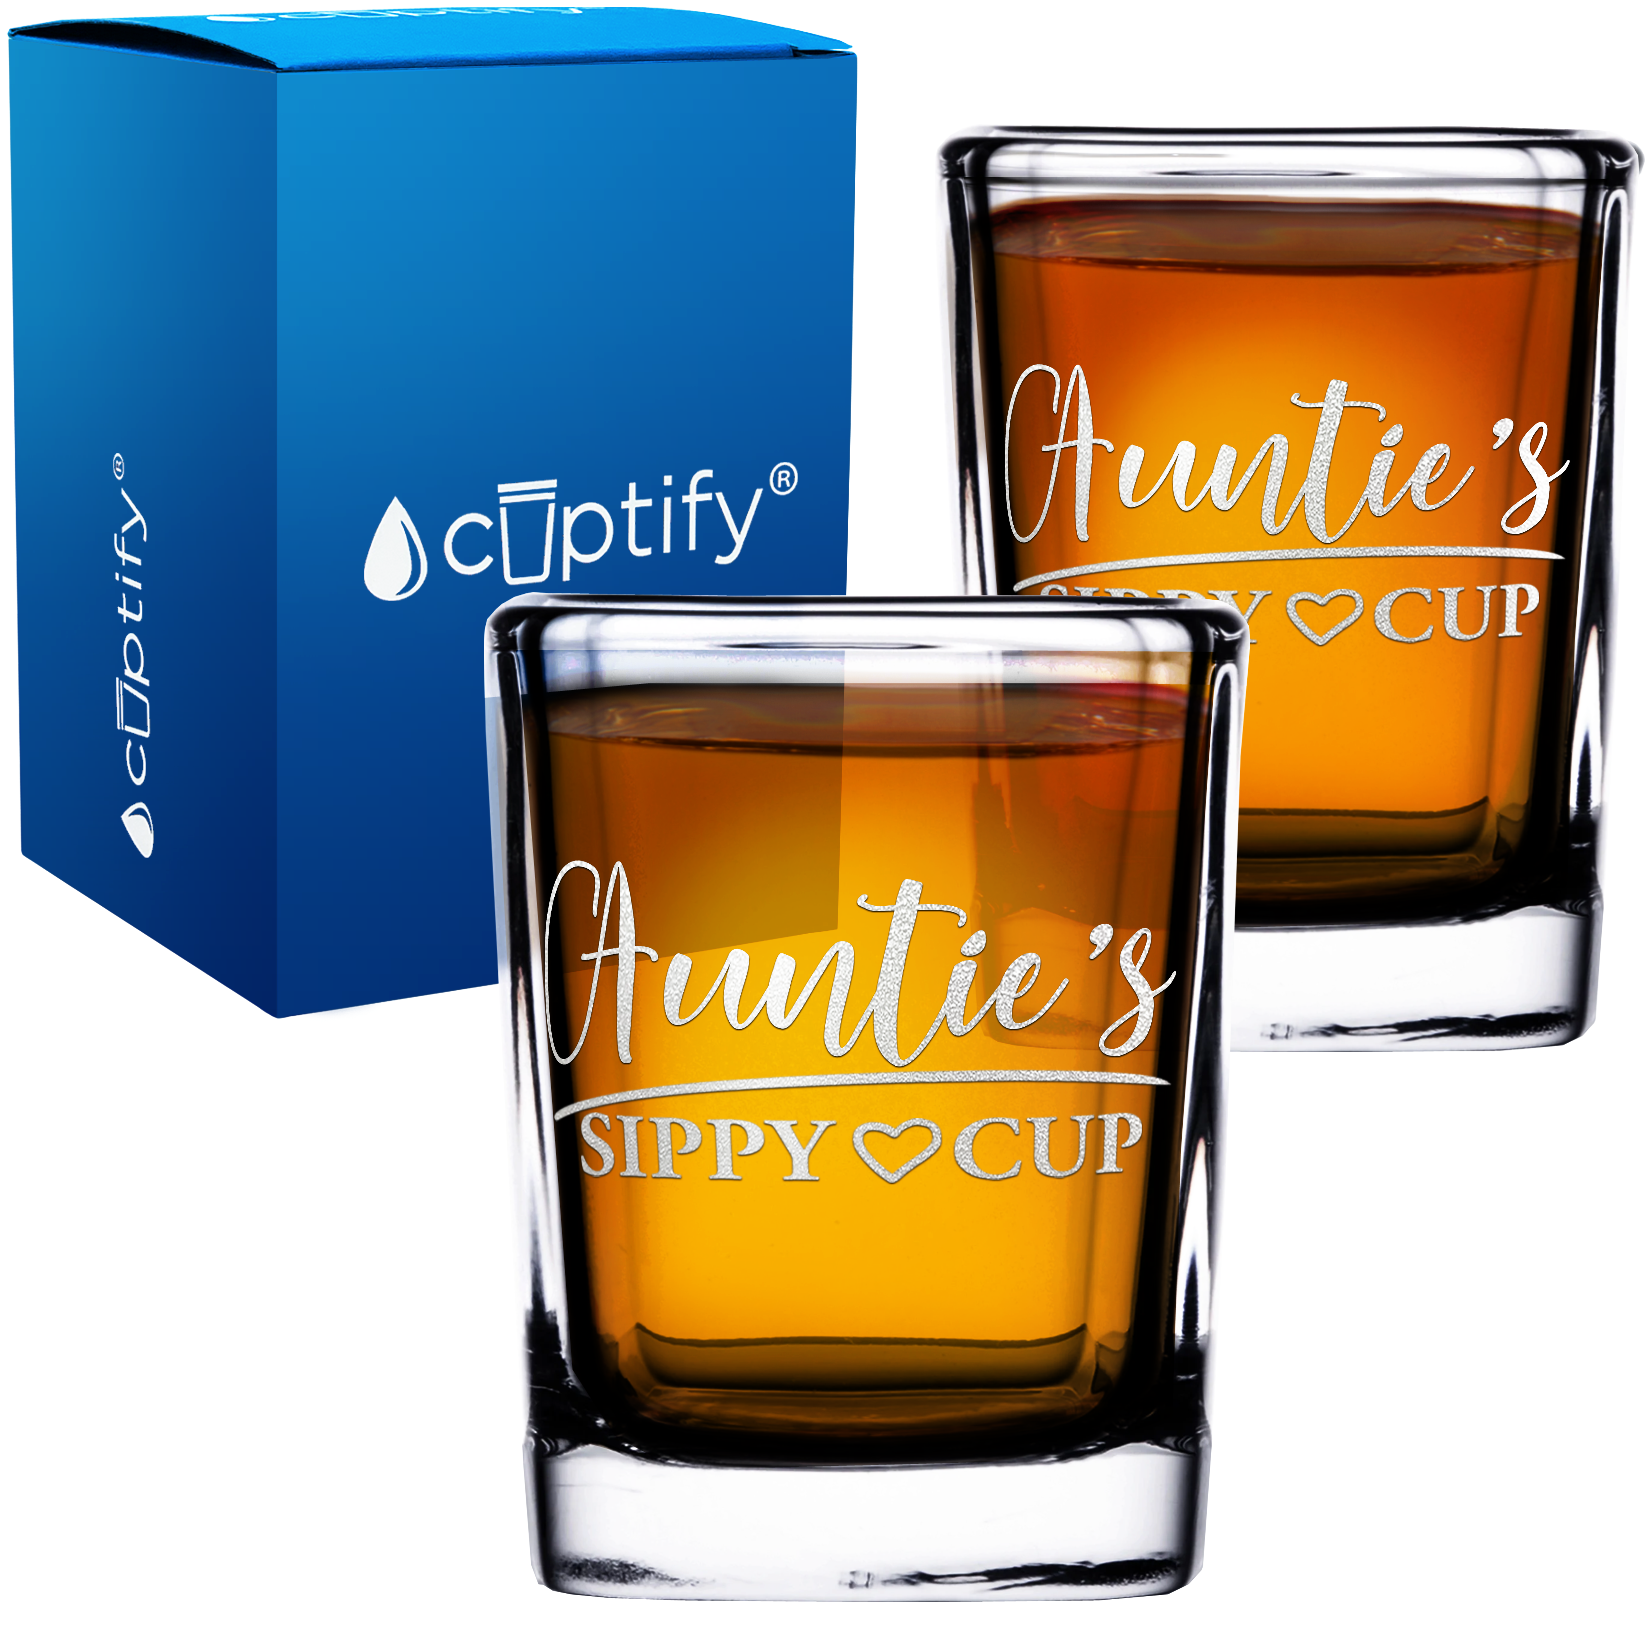 Auntie's Sippy Cup 2oz Square Shot Glasses - Set of 2